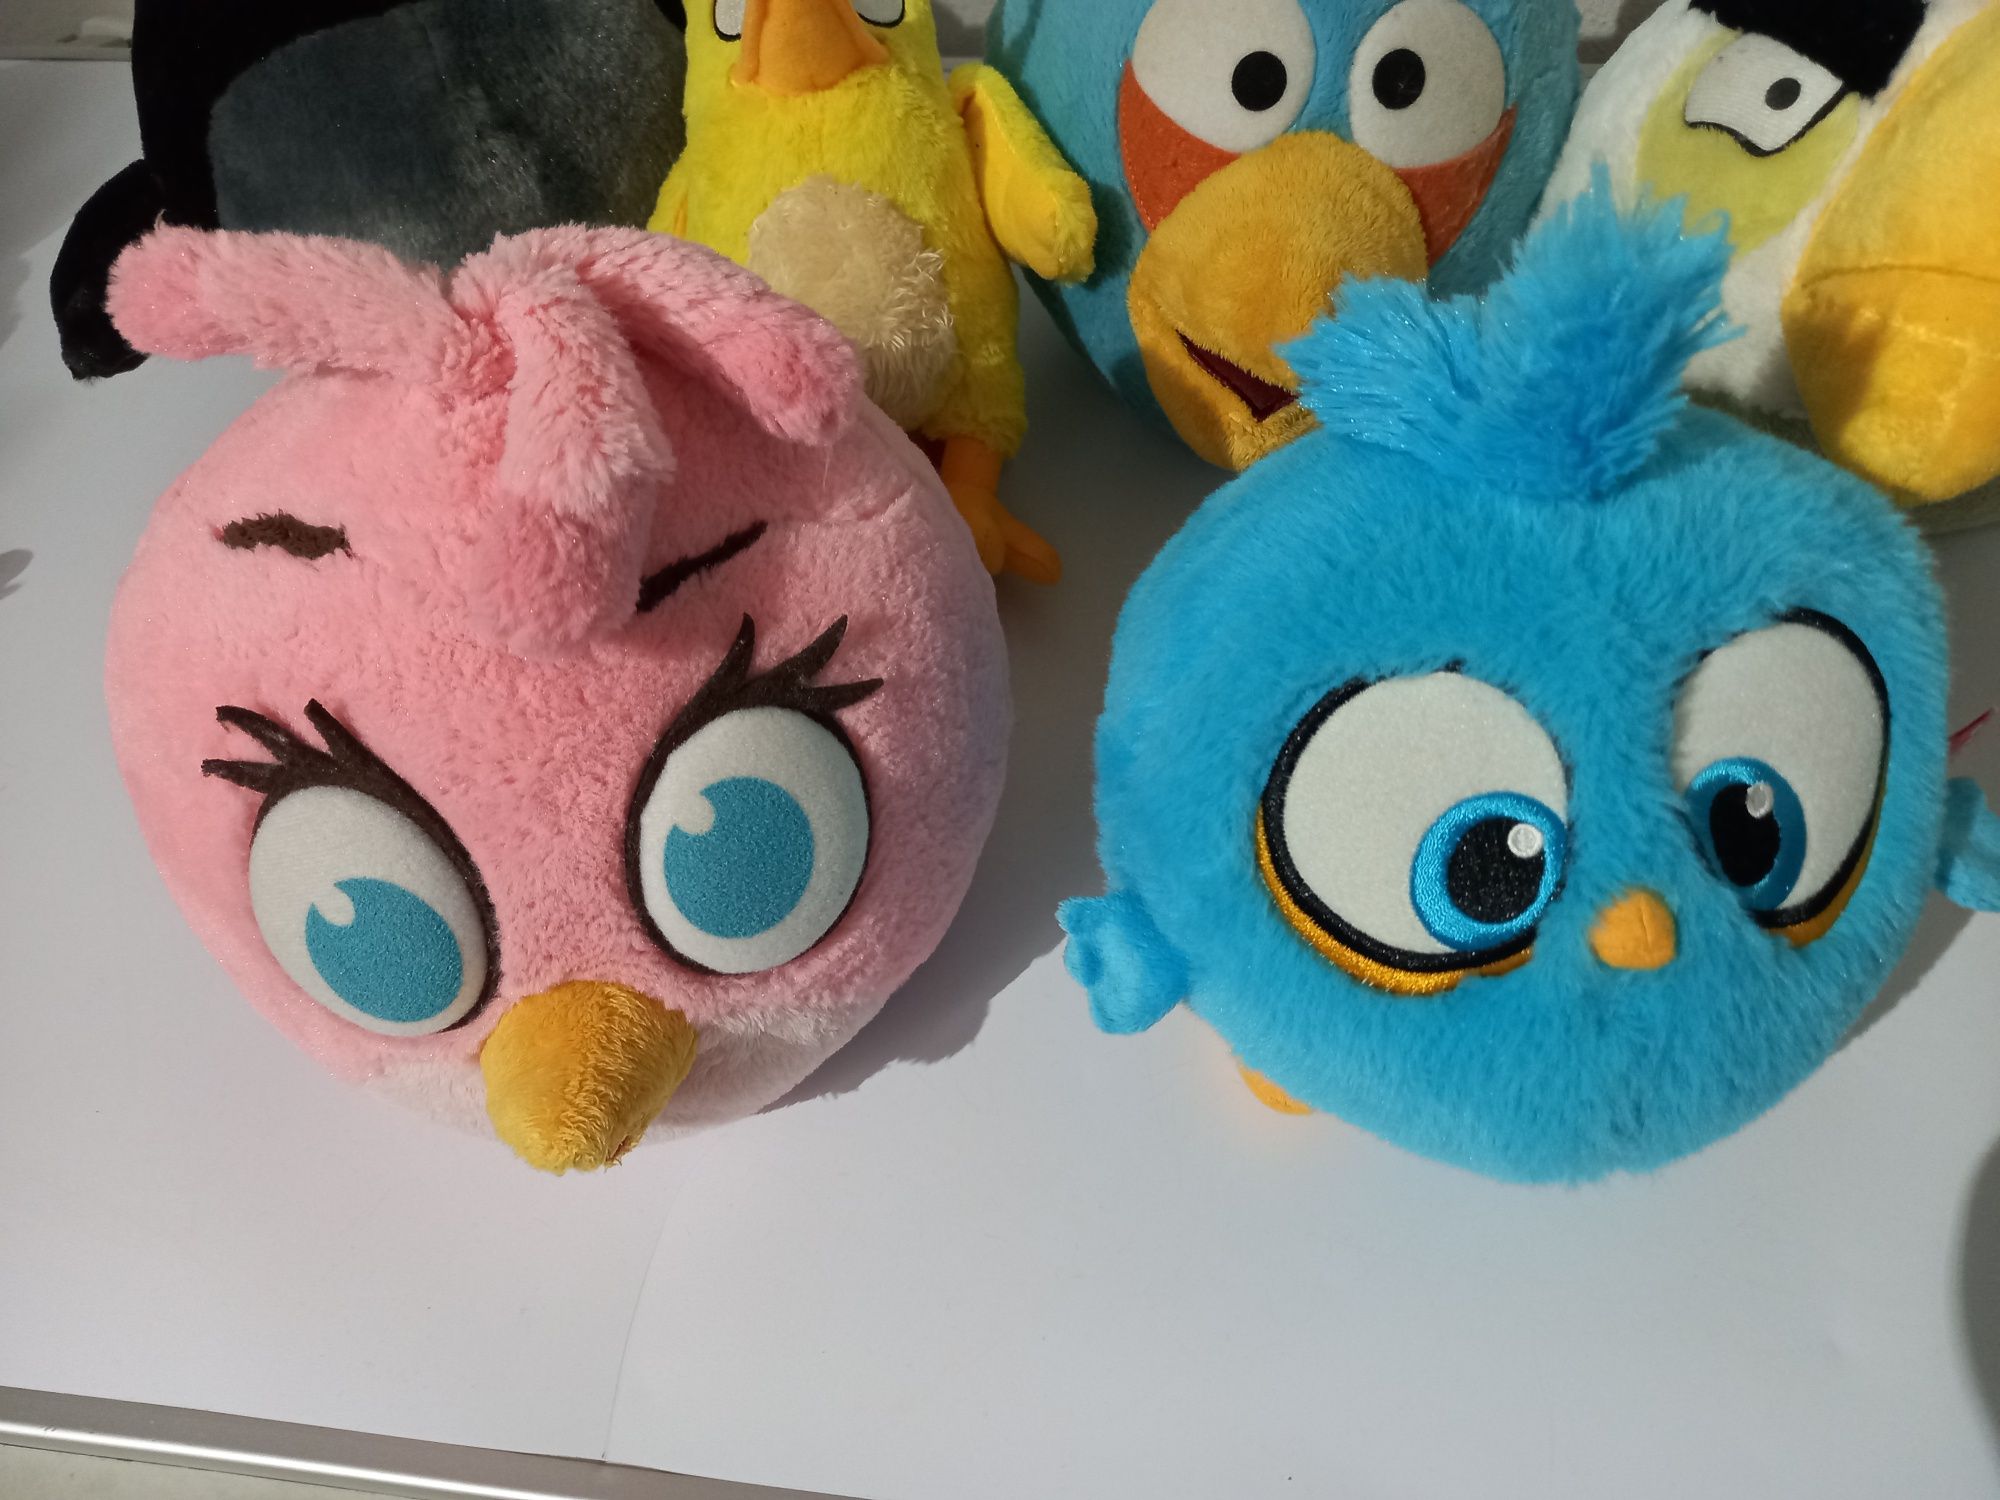 Peluches Angry Birds